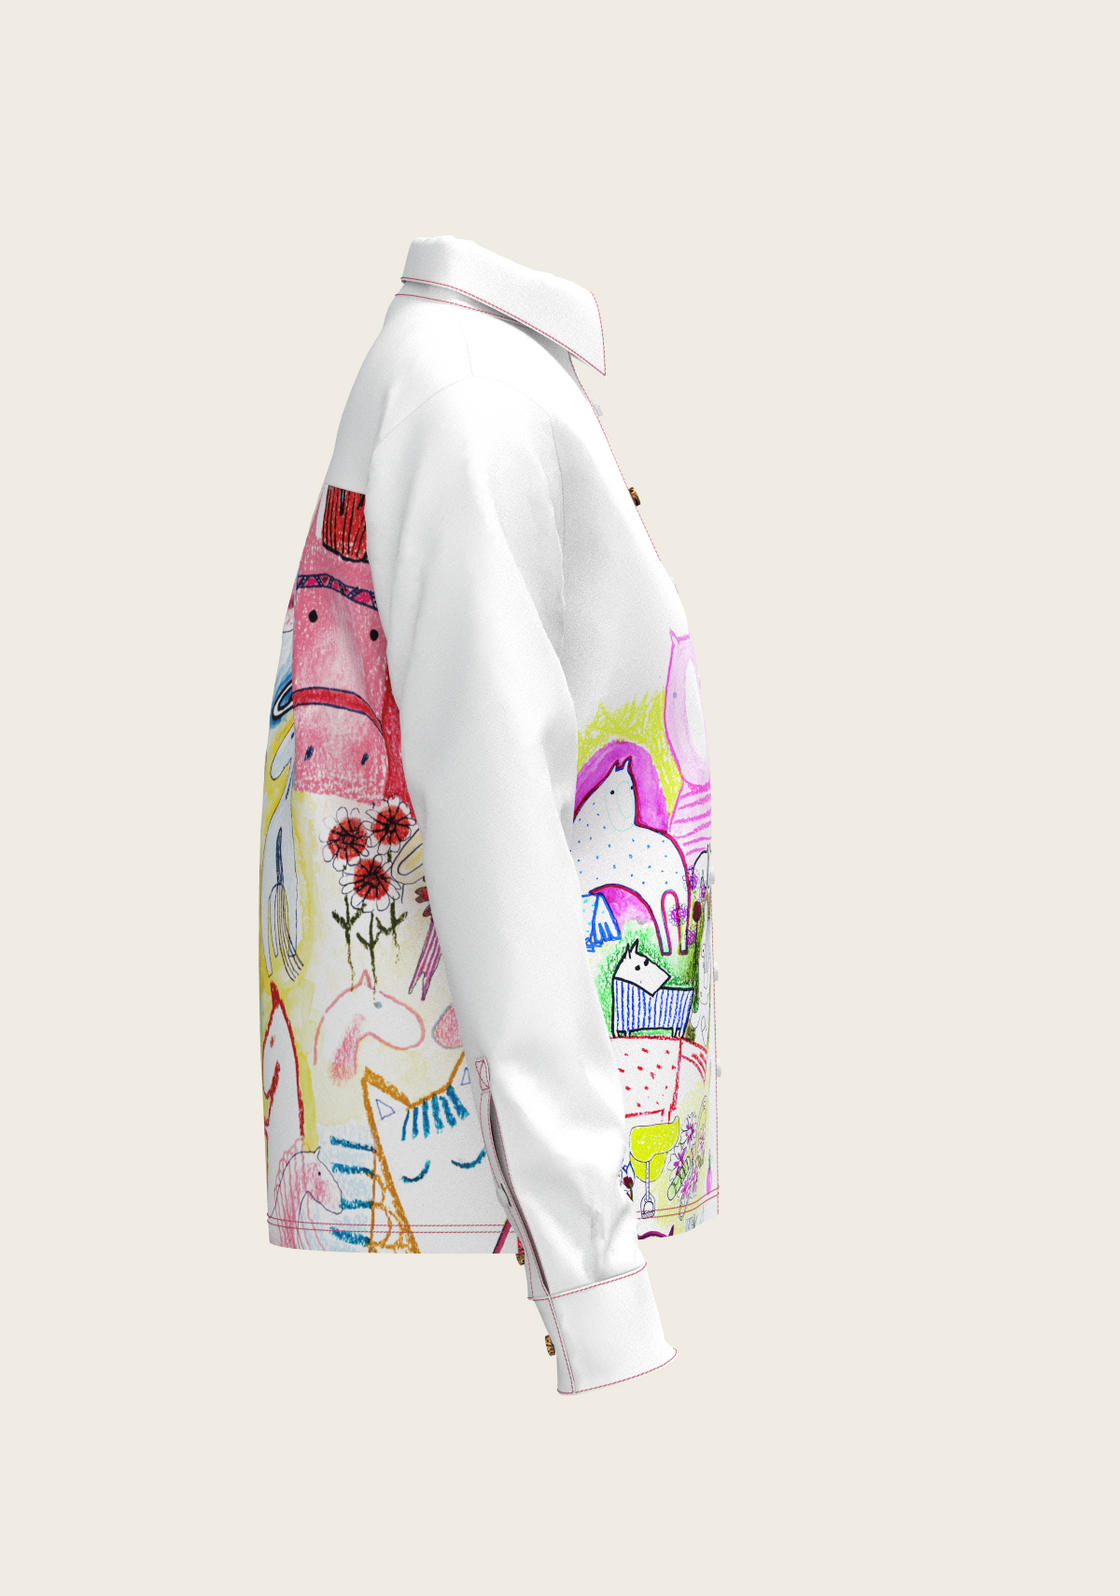 The Horse Fair on White Loose Fitting Button Shirt